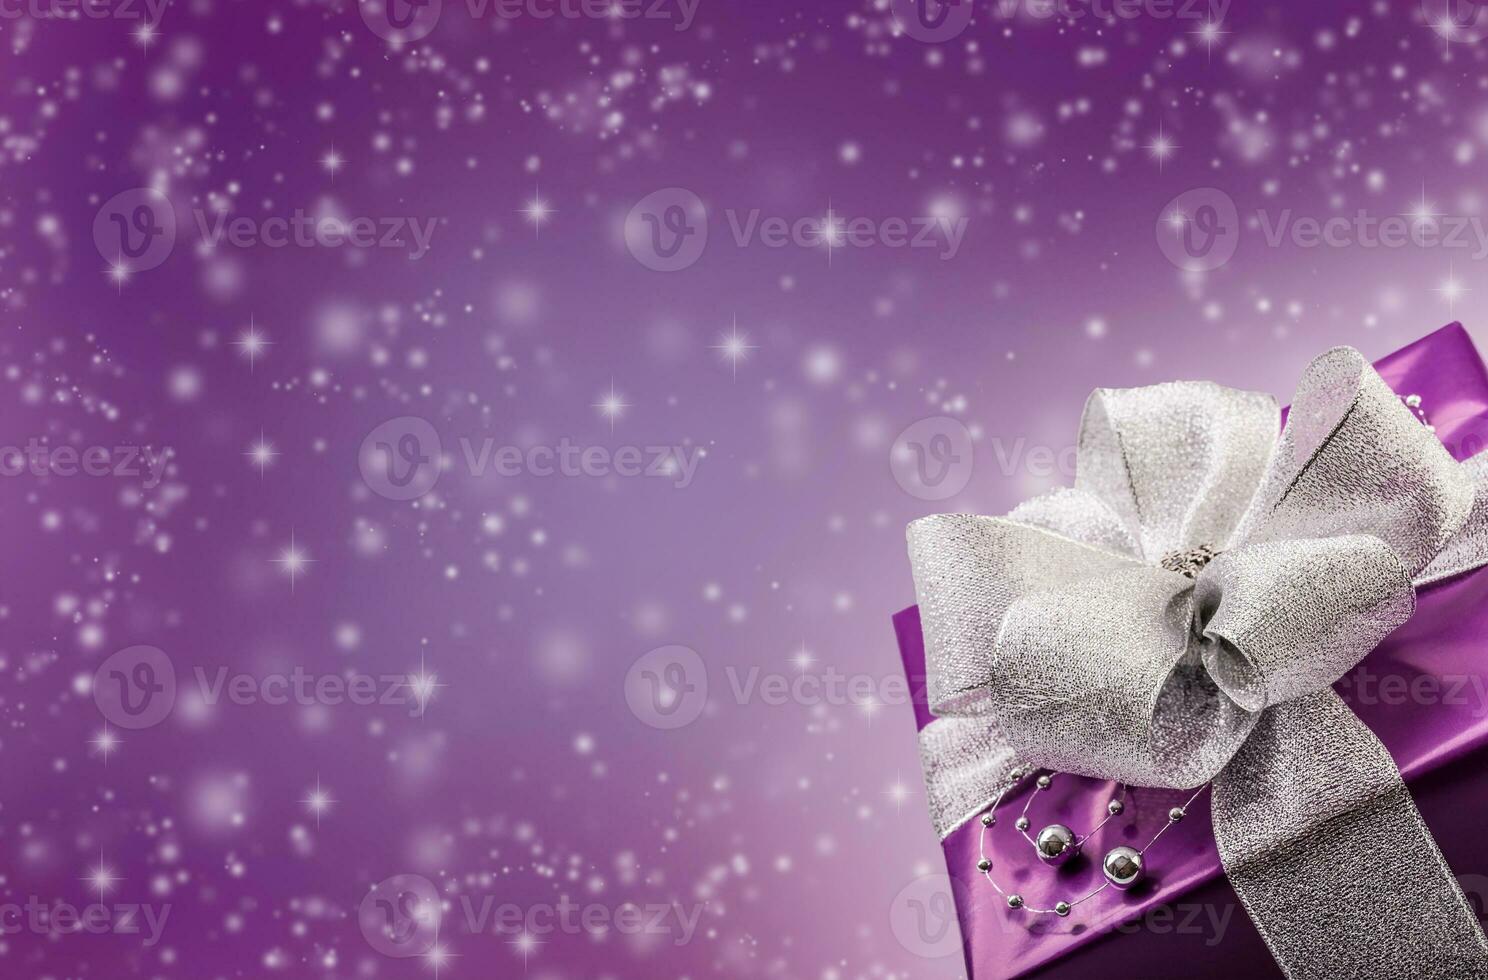 Christmas bokeh concept with purple present in the bottom right corner and illustrated snowflakes in the background photo